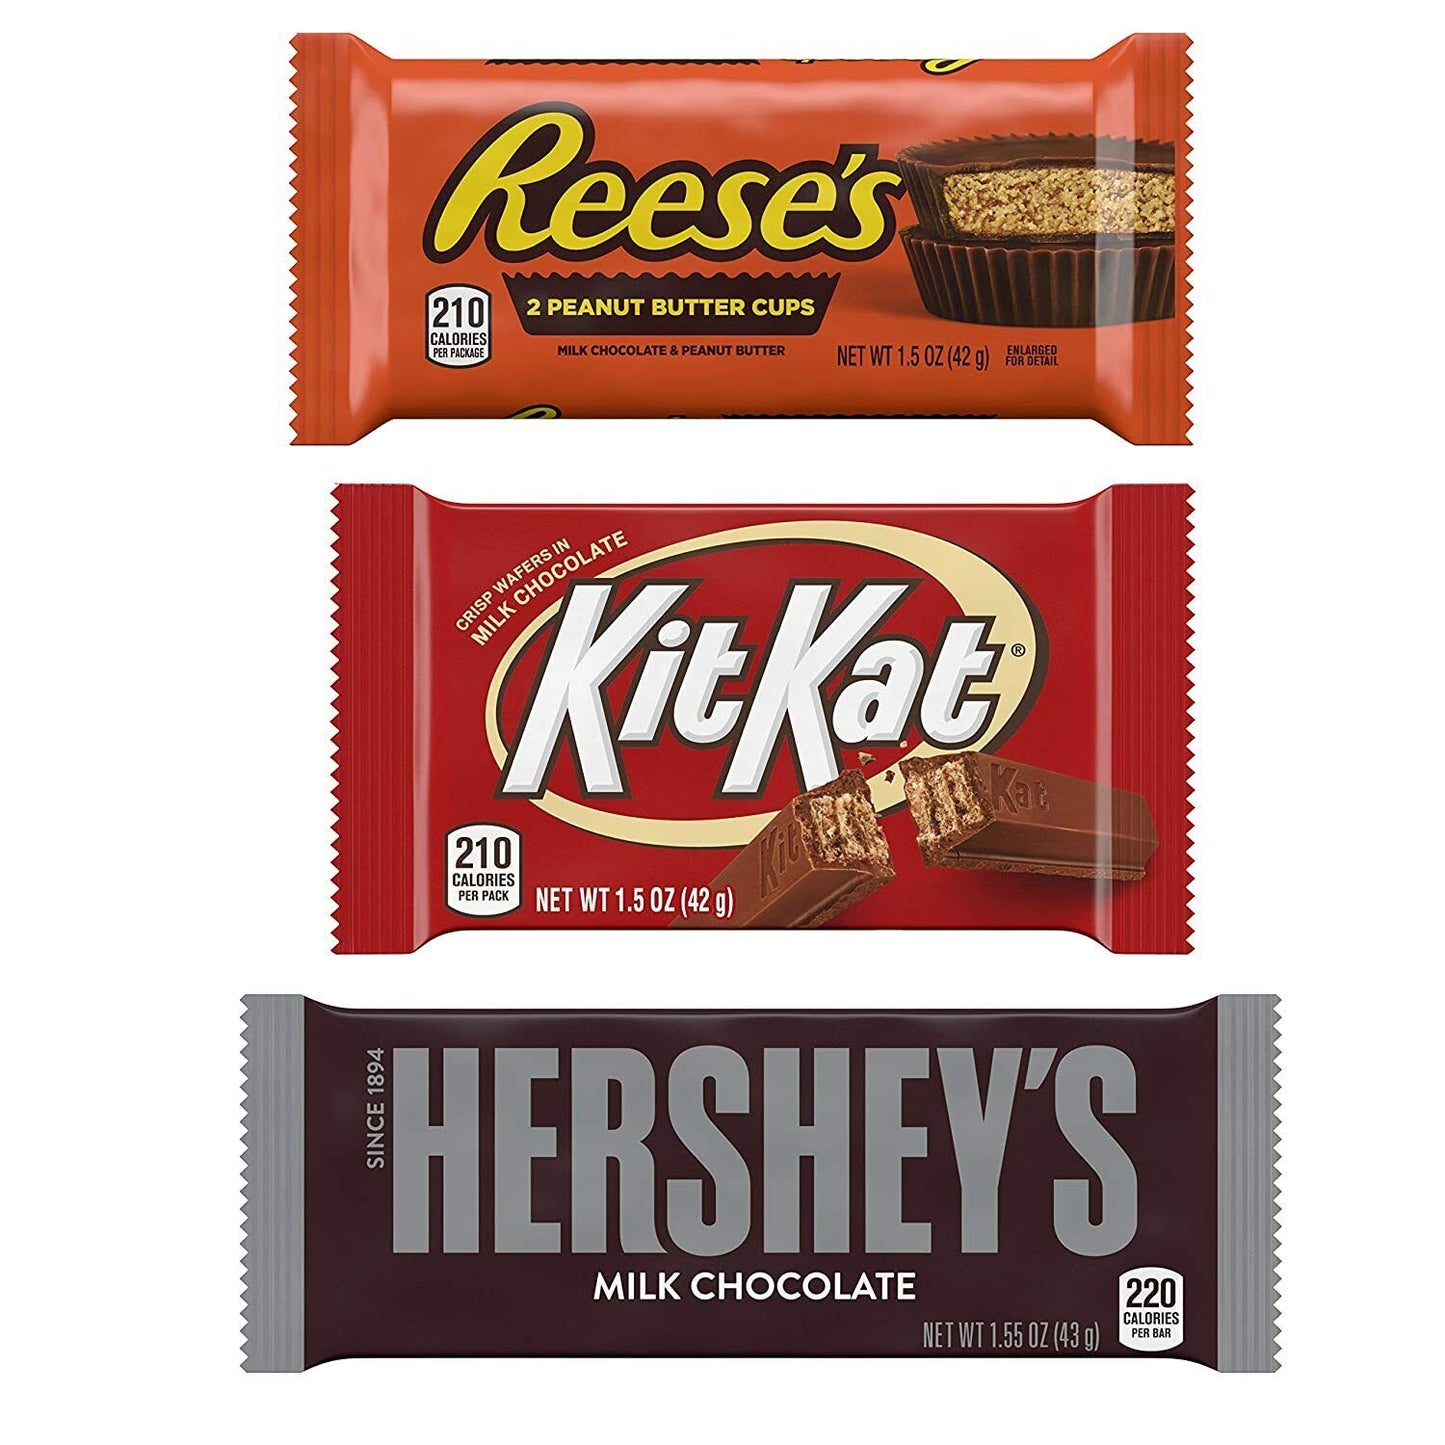 Hershey's Chocolate KIT KAT & REESE'S Peanut Butter Cups Full Size Bars 18 ct